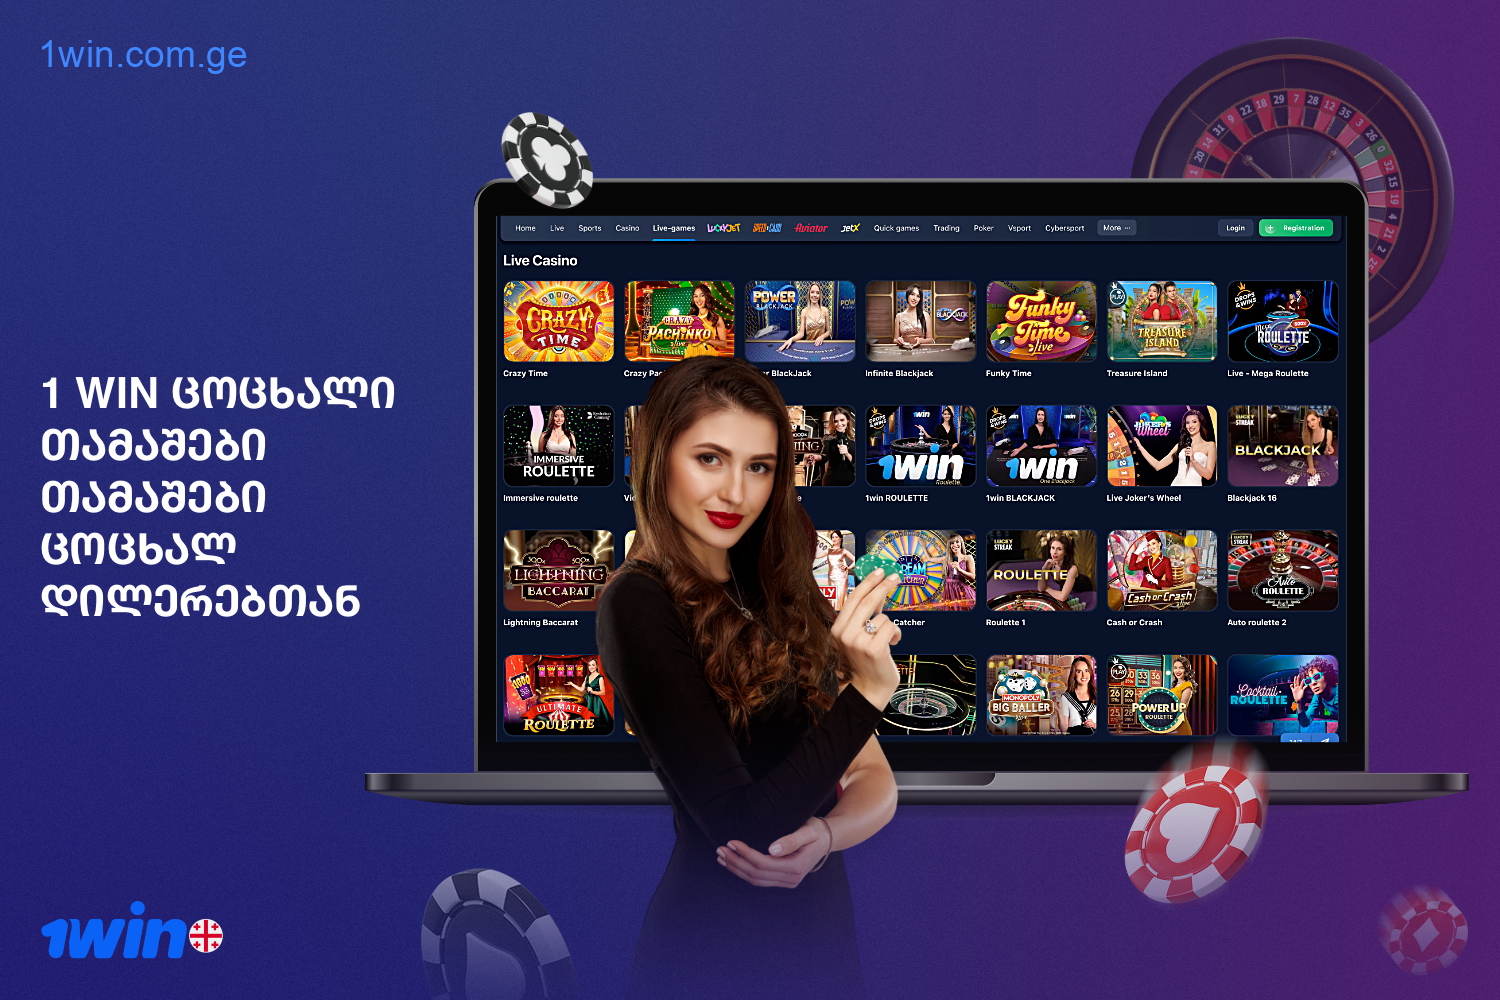 Popular games with live dealers are available at 1win